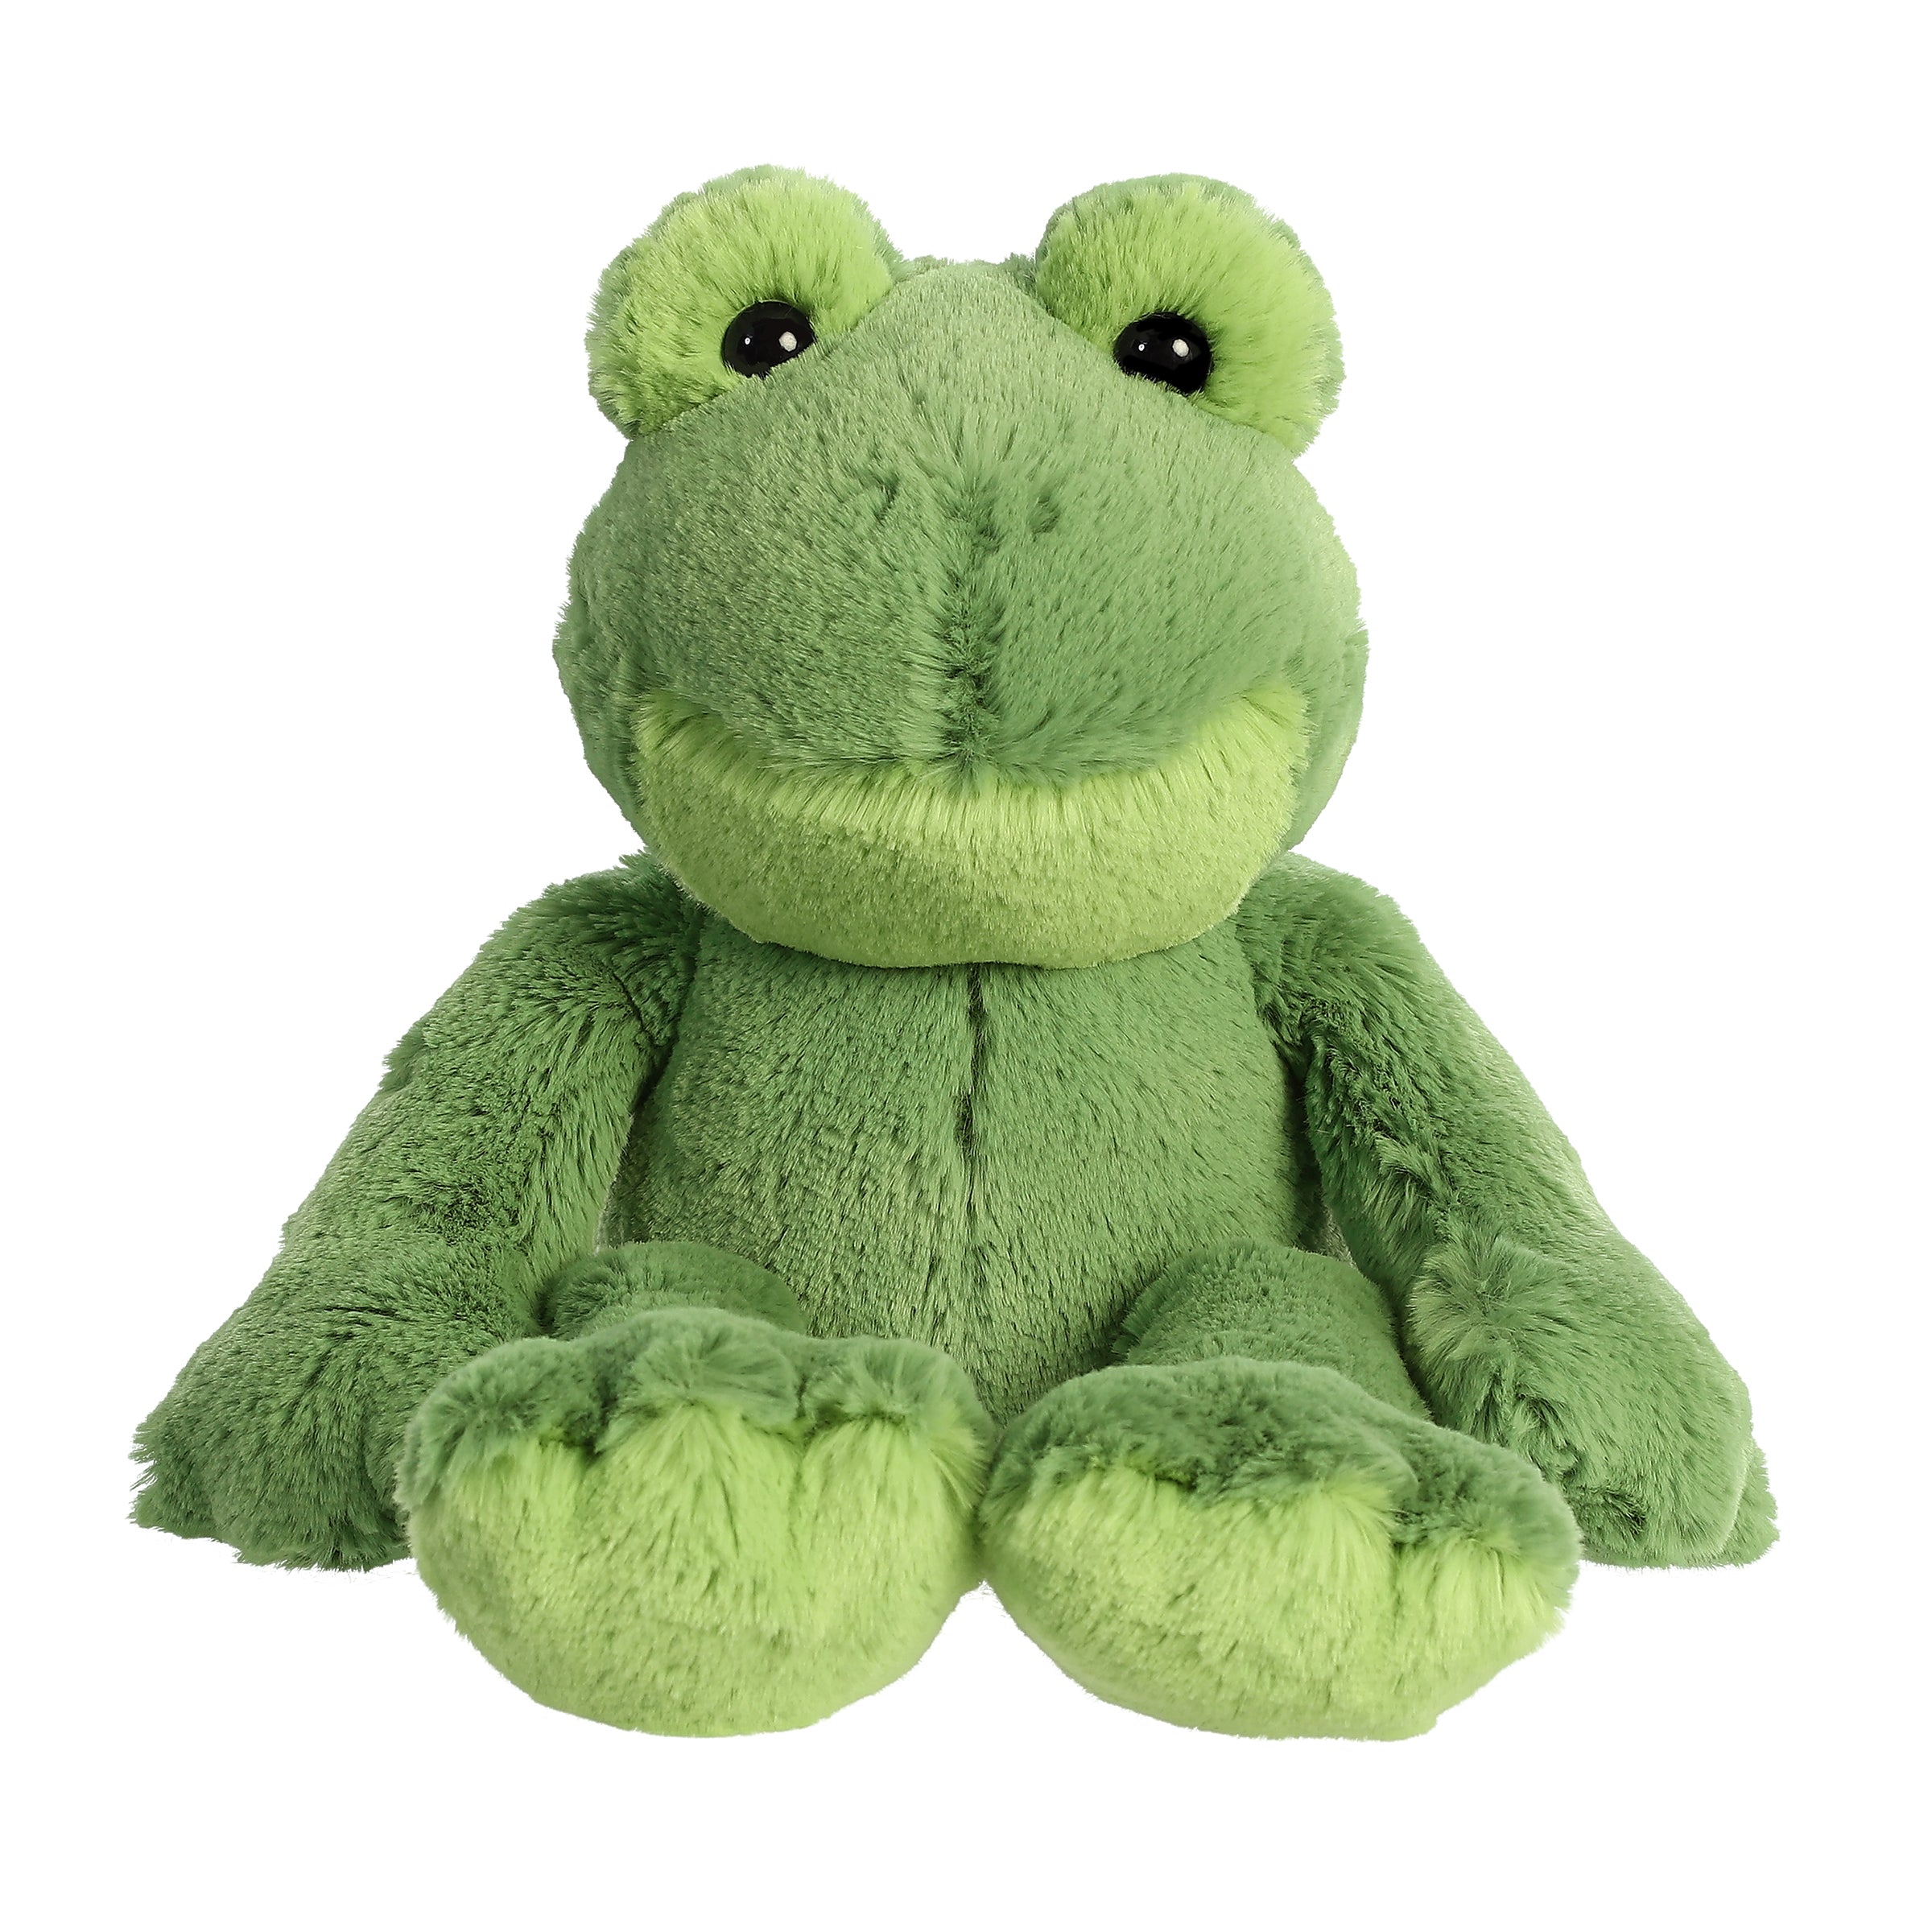 FROG Stuffed Animal, 16 Plushie, Make Your Own Stuffie, Soft and